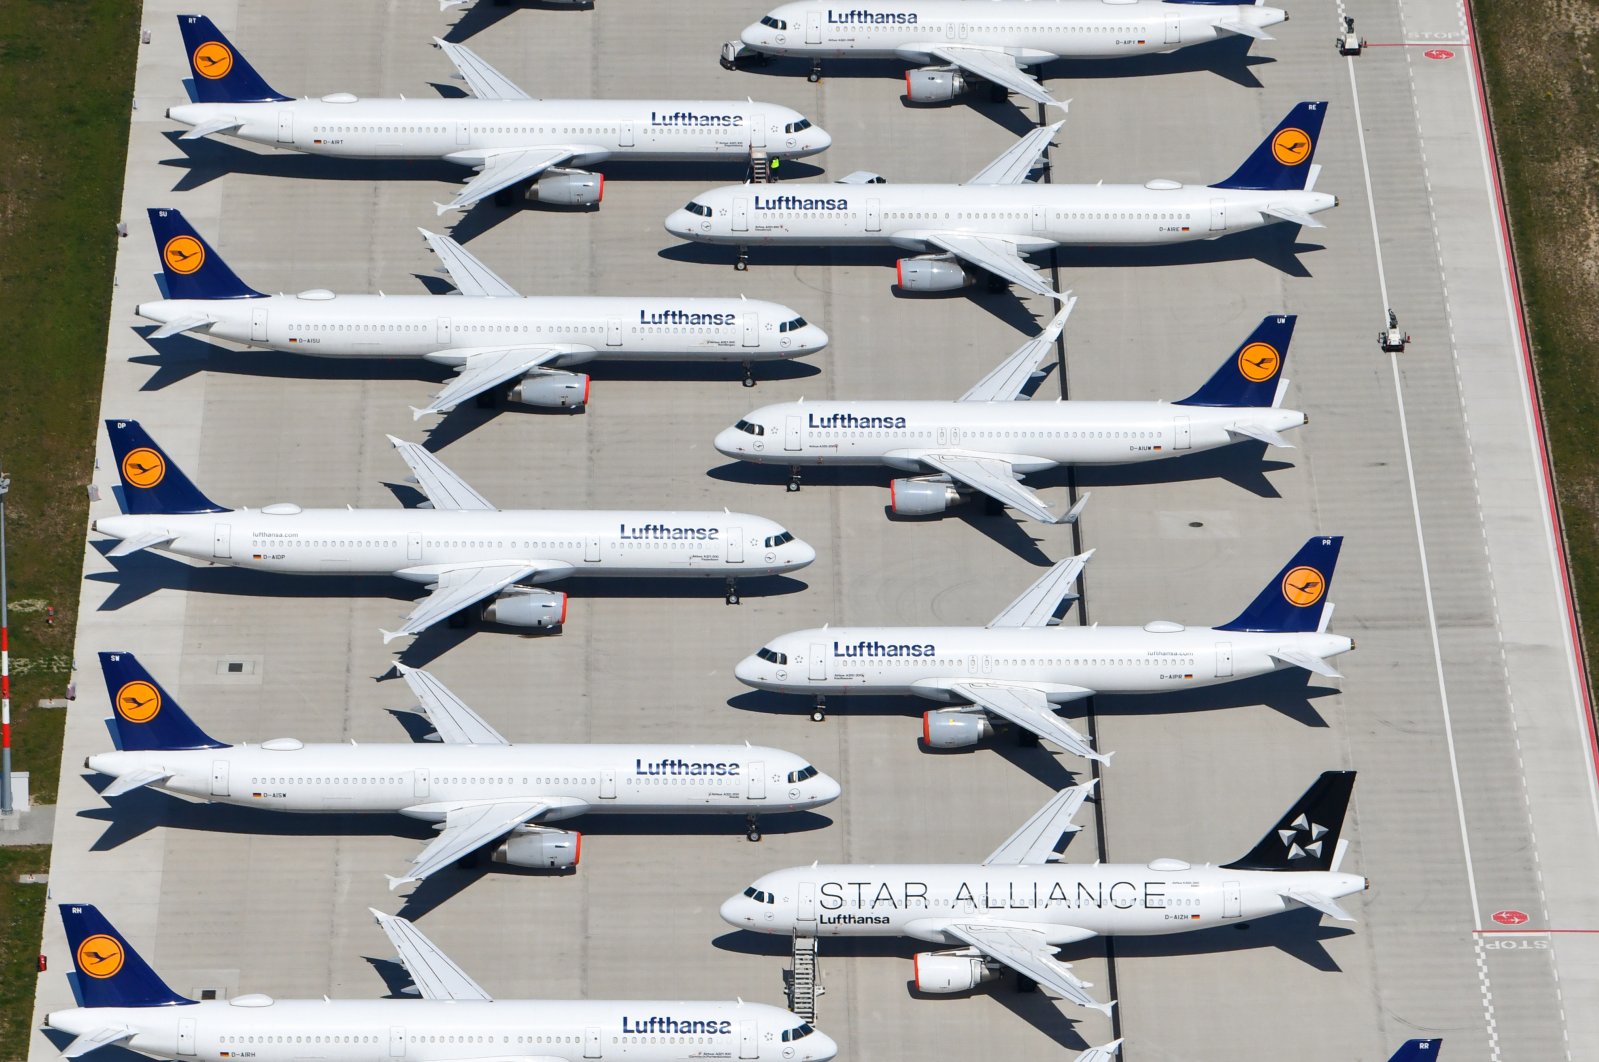 An aerial view shows aircraft of Lufthansa sitting on the tarmac at the Berlin Brandenburg International Airport in Schoenefeld, Germany, April 23, 2020. (EPA Photo)